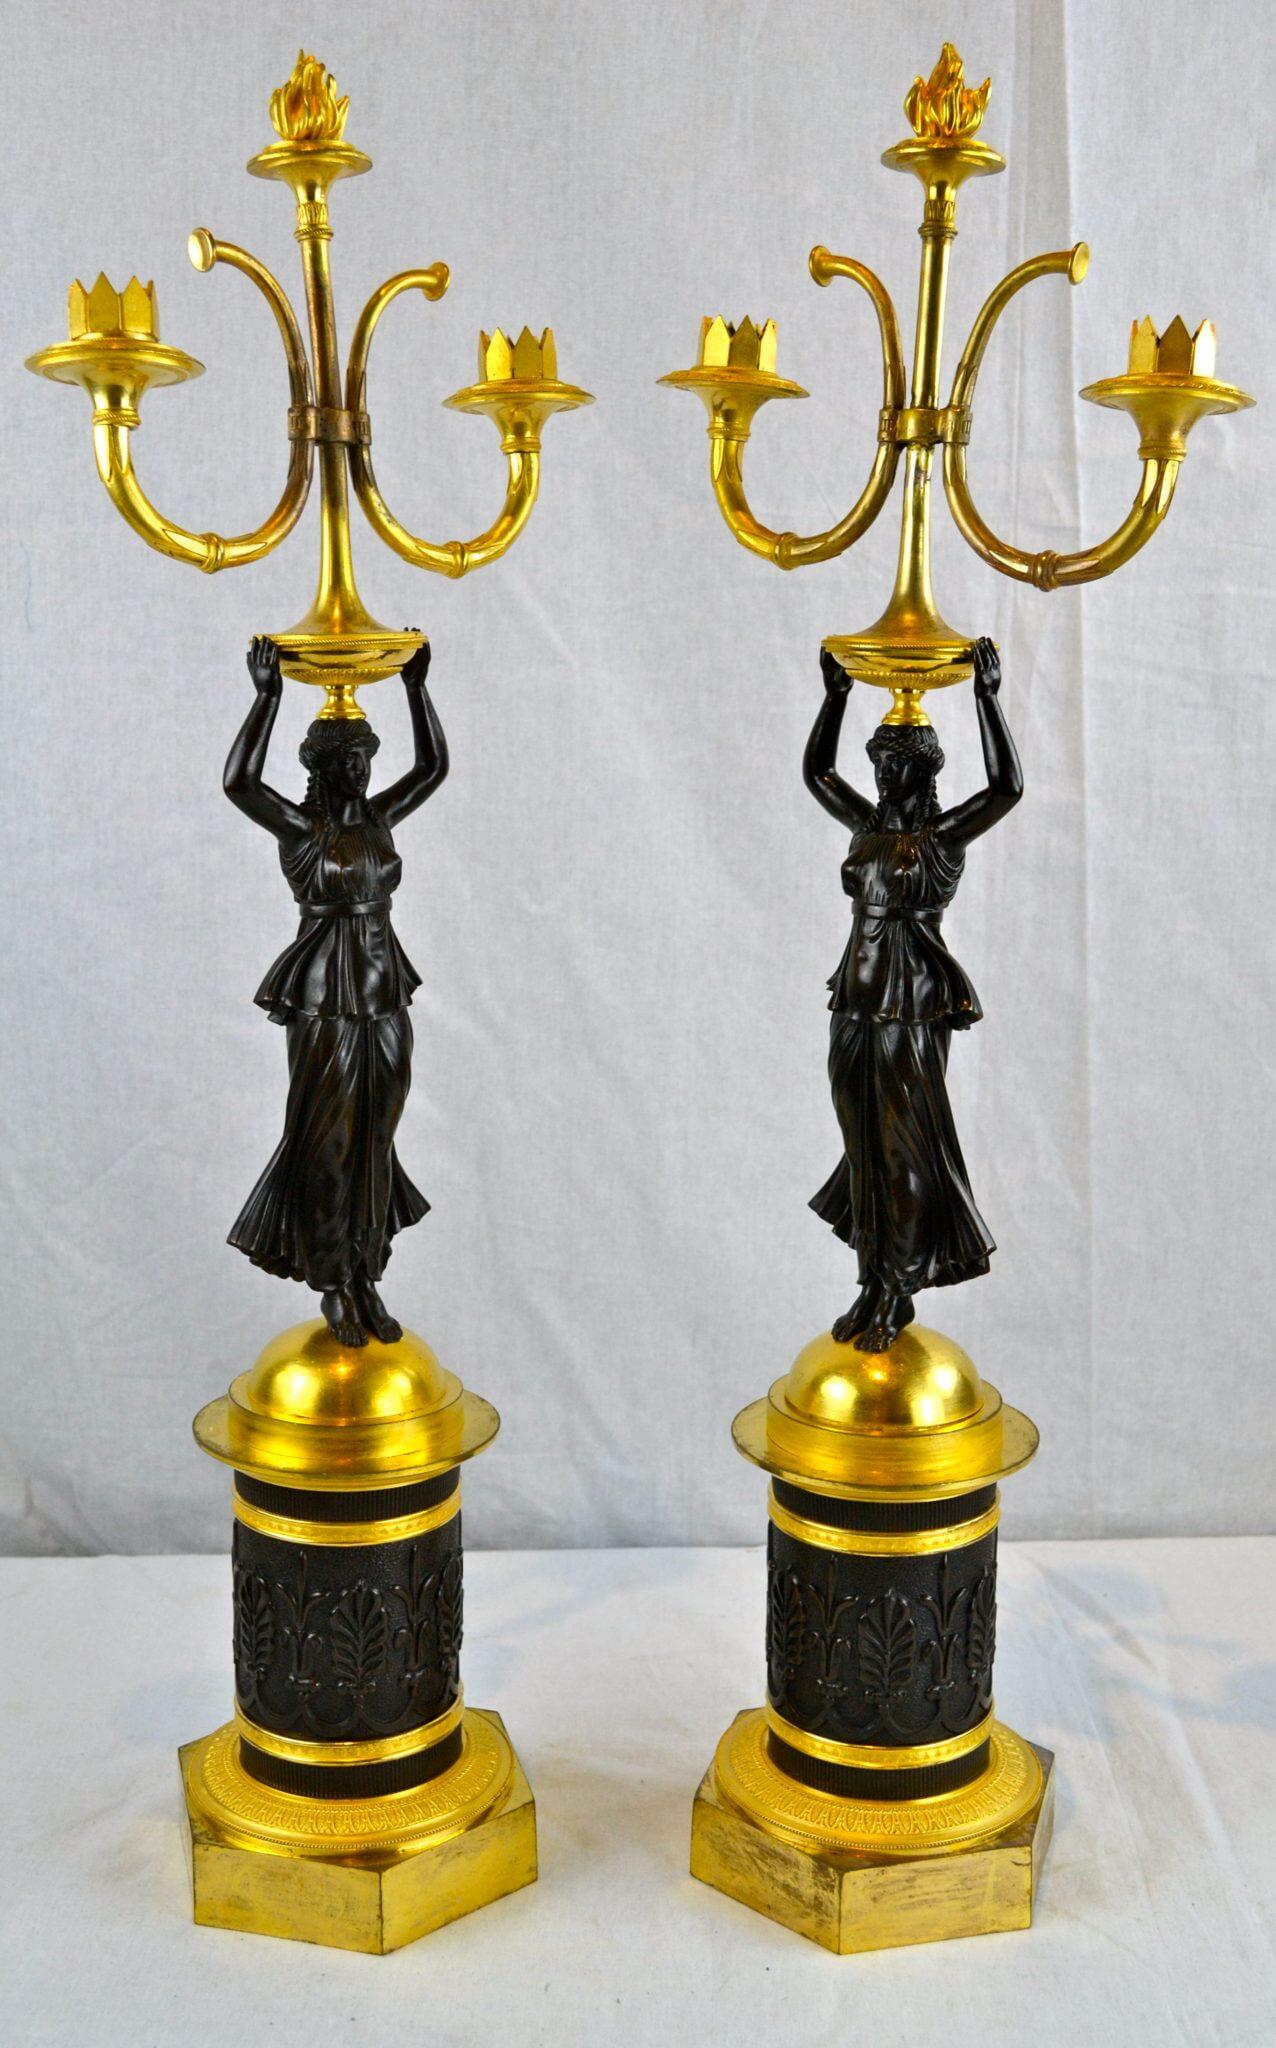 Gilt French Empire Style Figural Candelabra, Pair For Sale